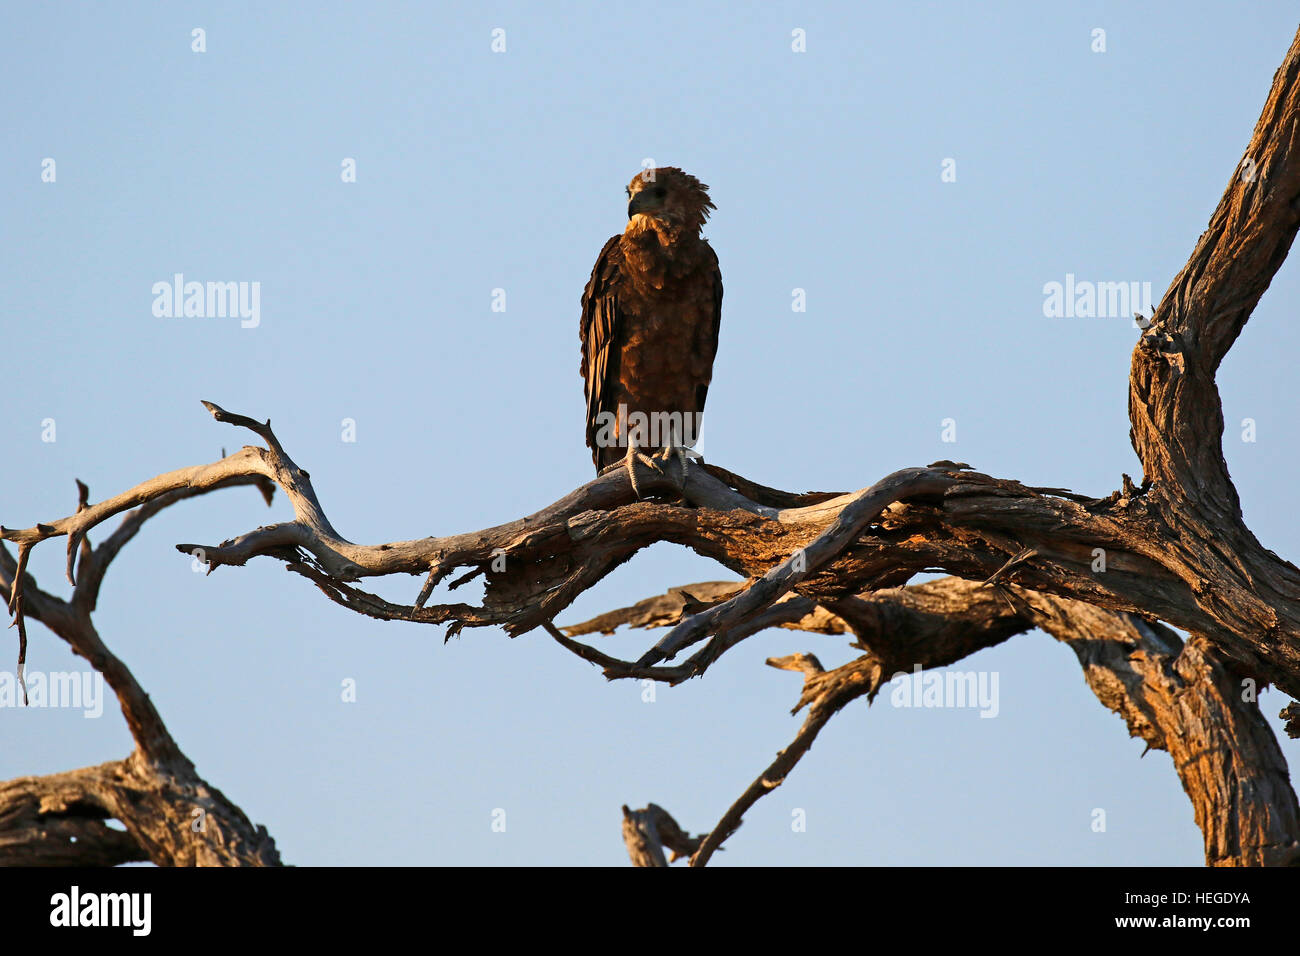 Wahlberg's Eagle one of Africa's raptors perched high up on a dead tree bough with blue sky background Stock Photo